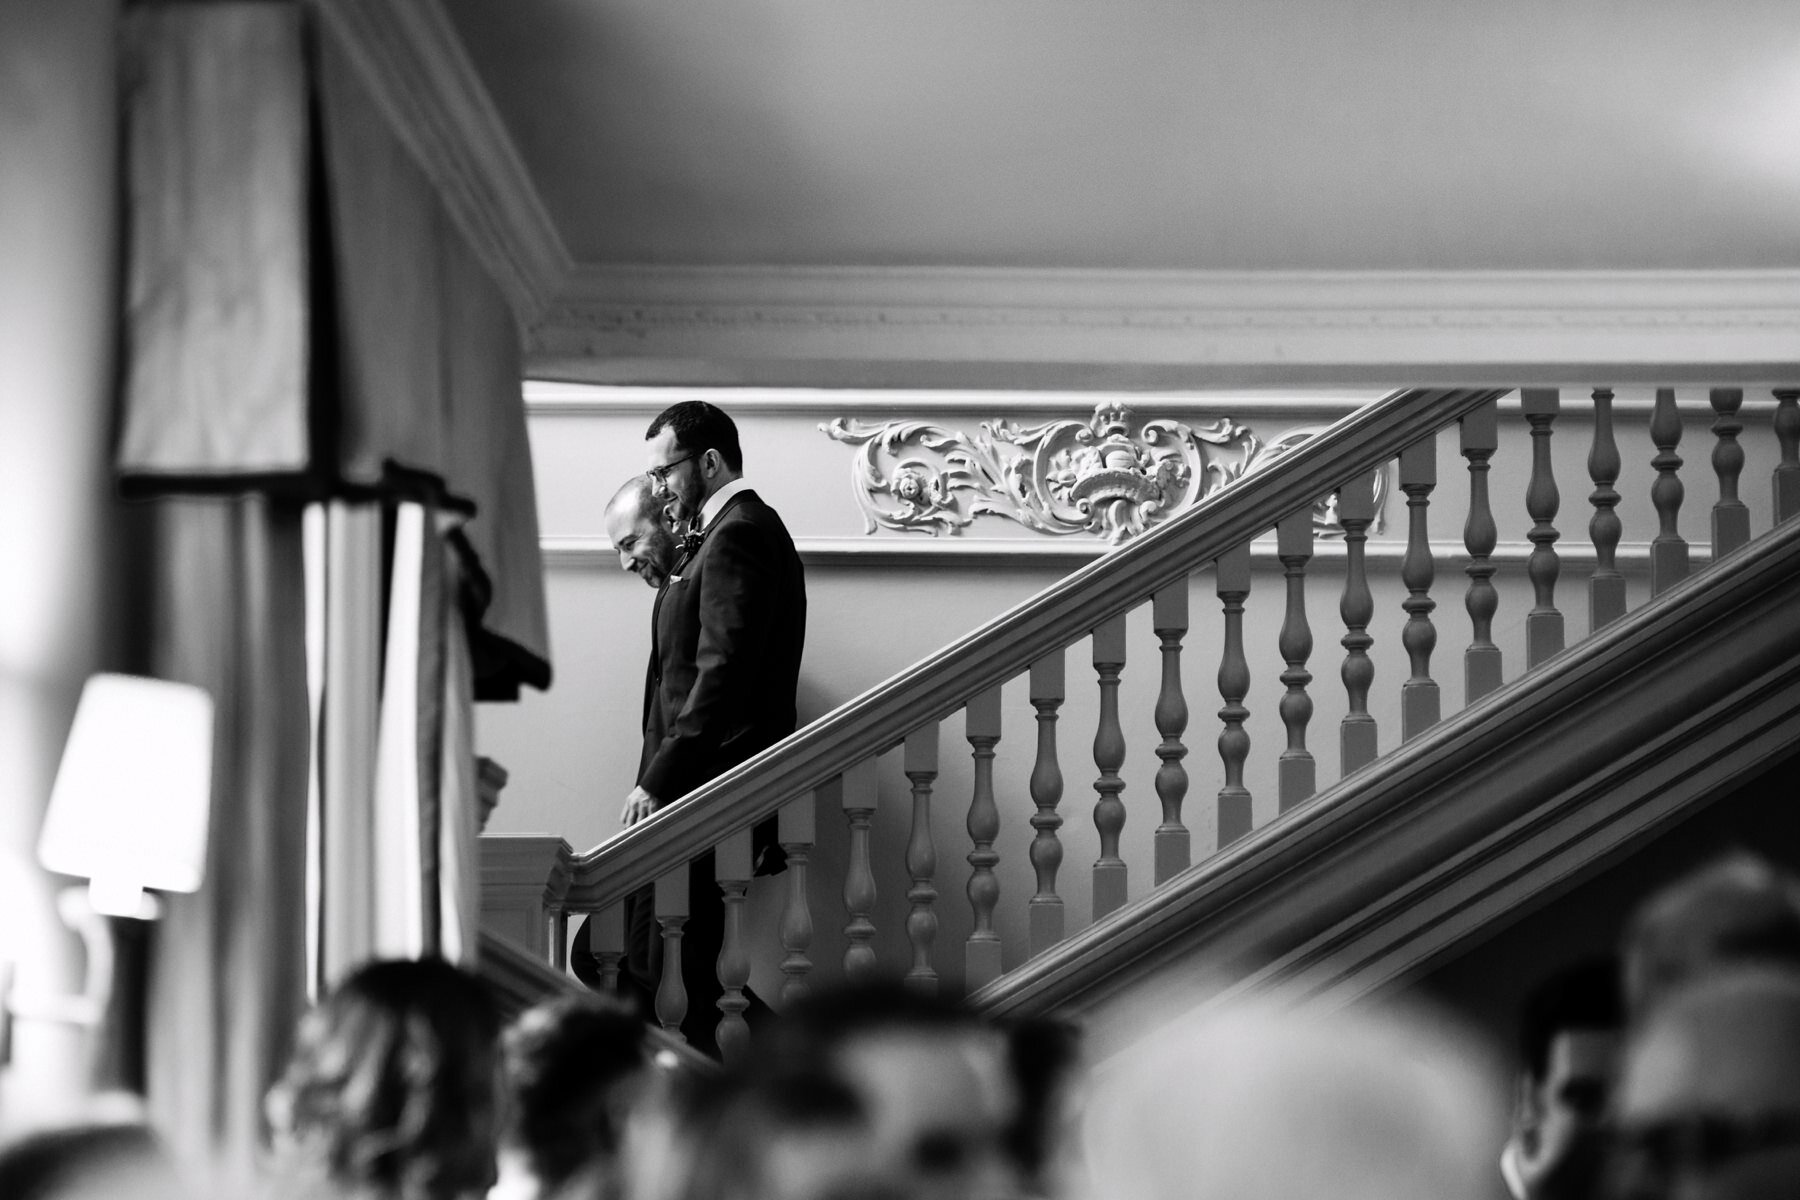 Two grooms make their way to their wedding ceremony at Morden Hall